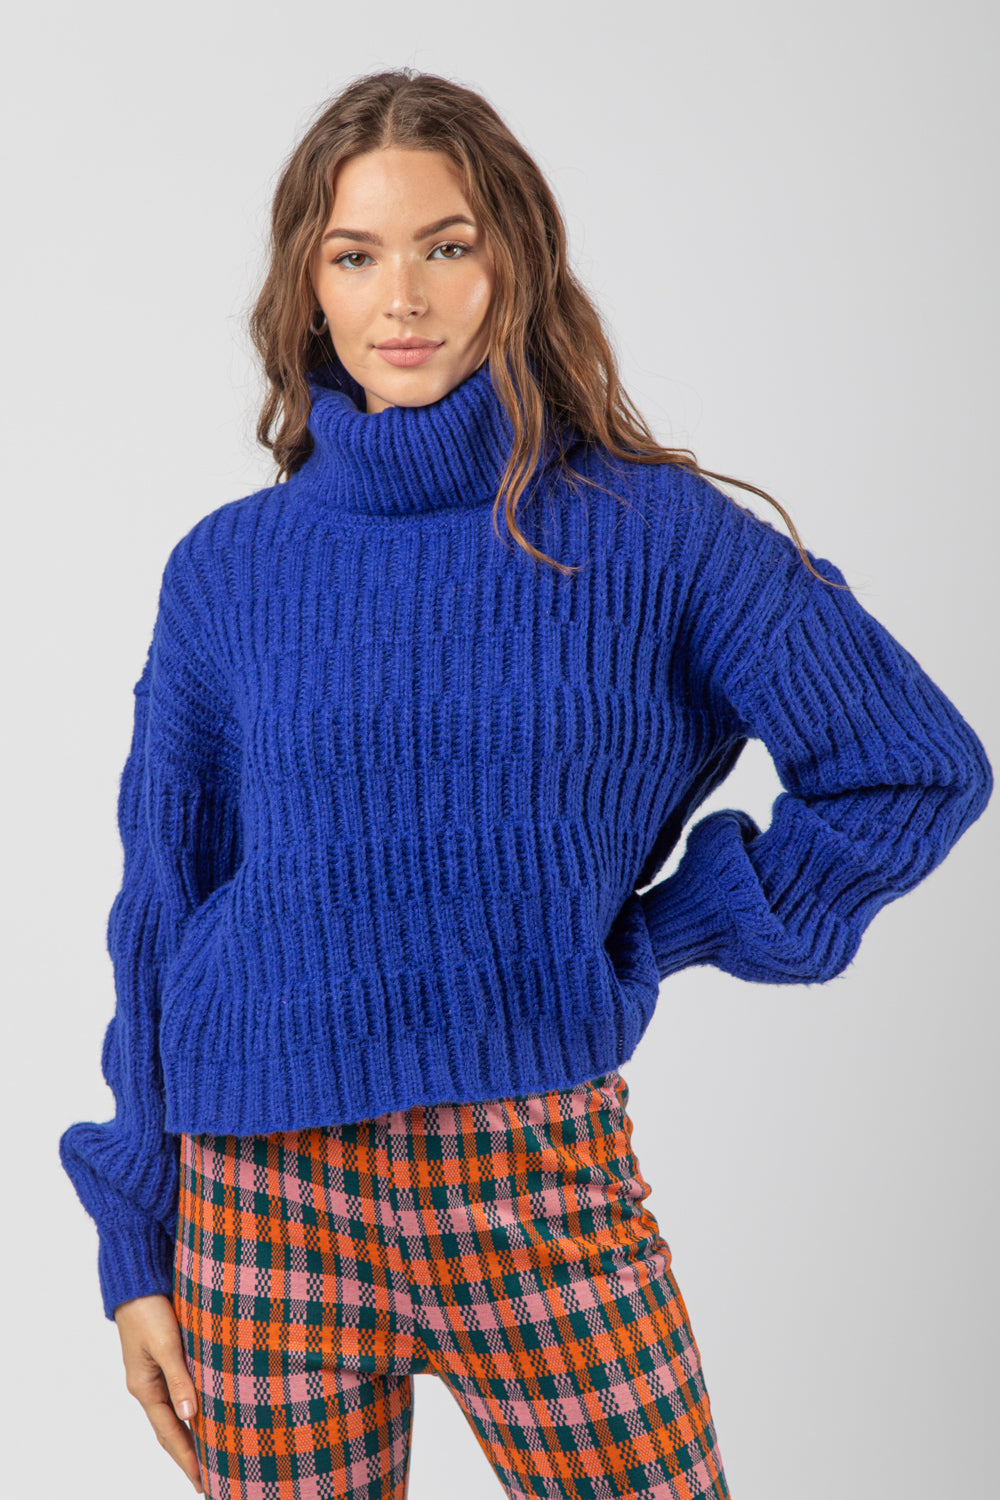 Royal Blue Turtle Neck Textured Knit Sweater Top Final Sale